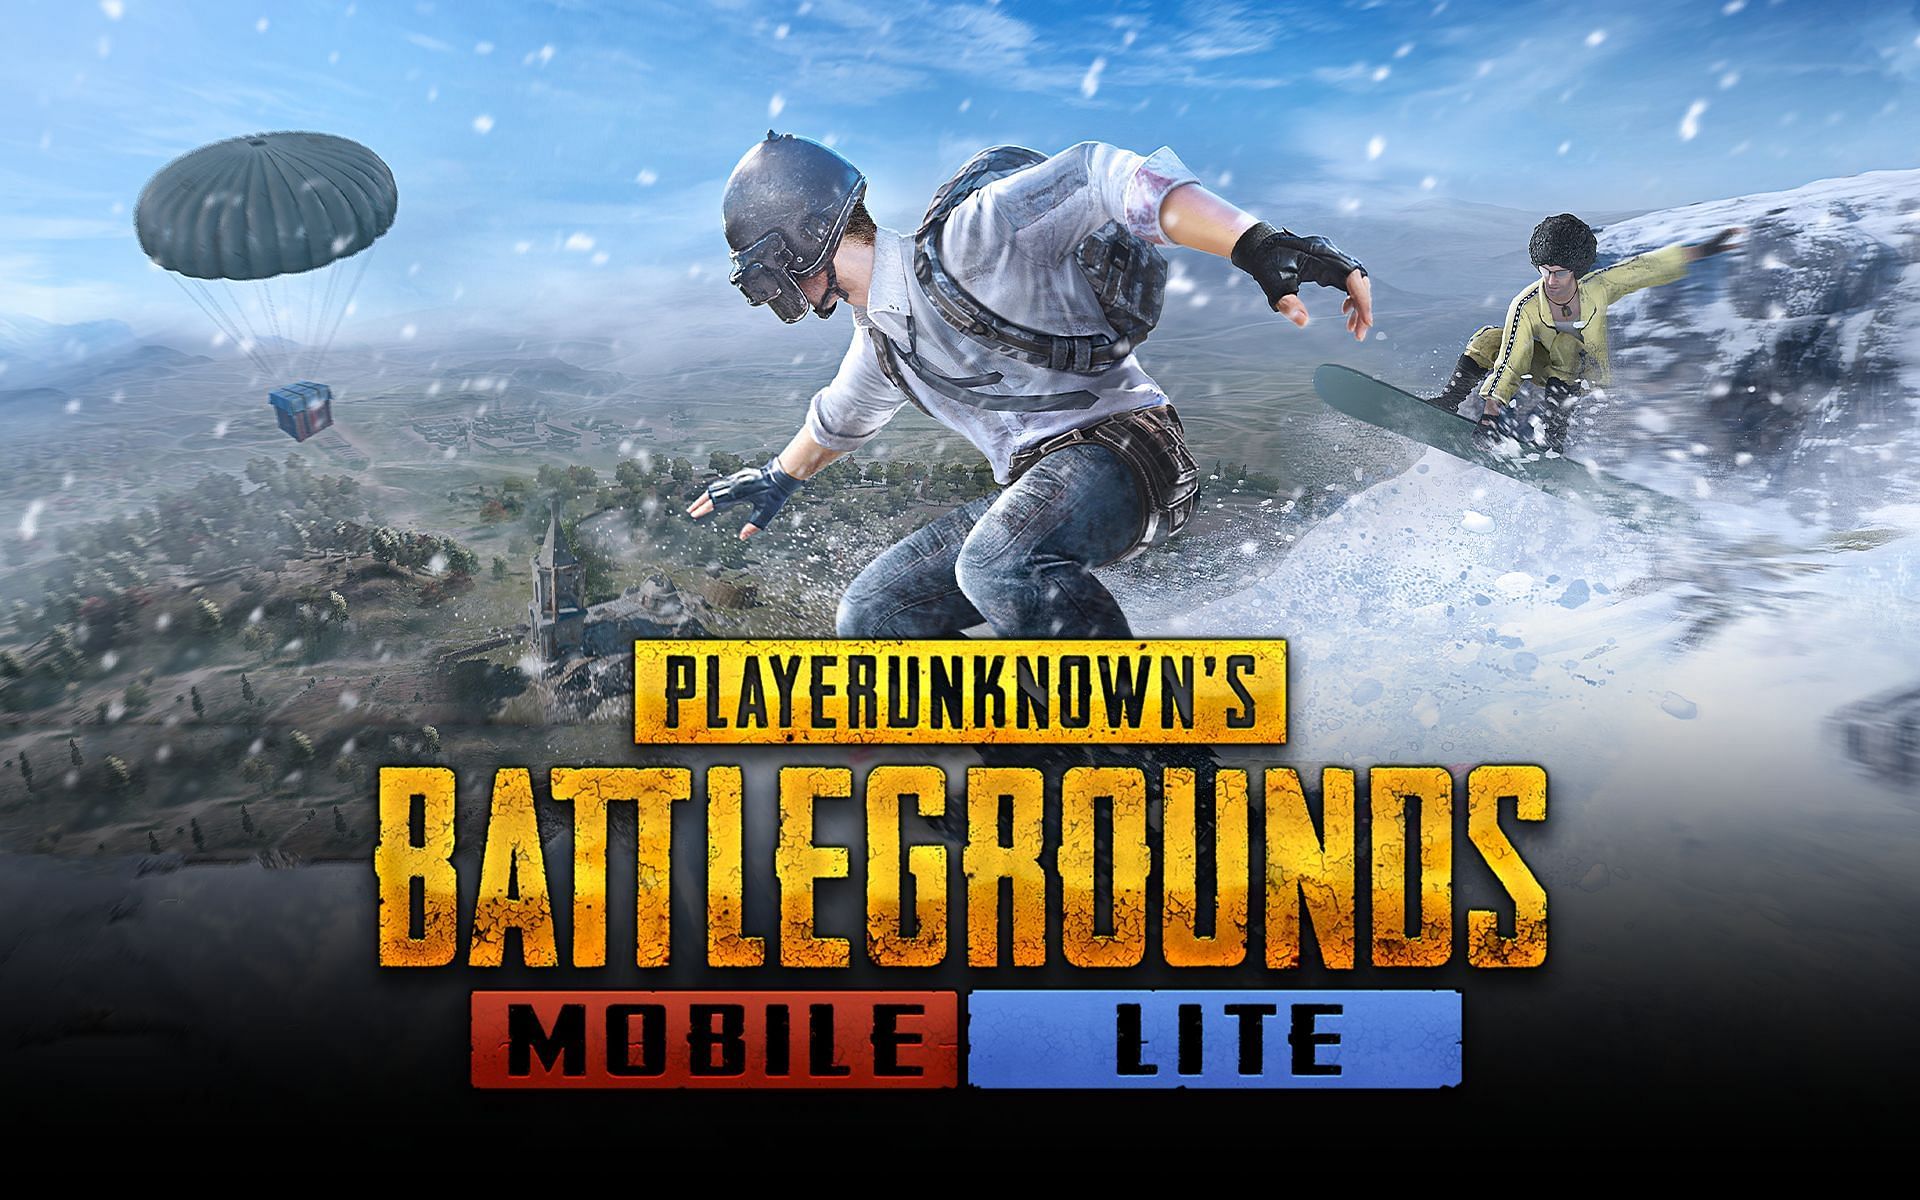 Can fans expect the next PUBG Mobile Lite update in January 2022?